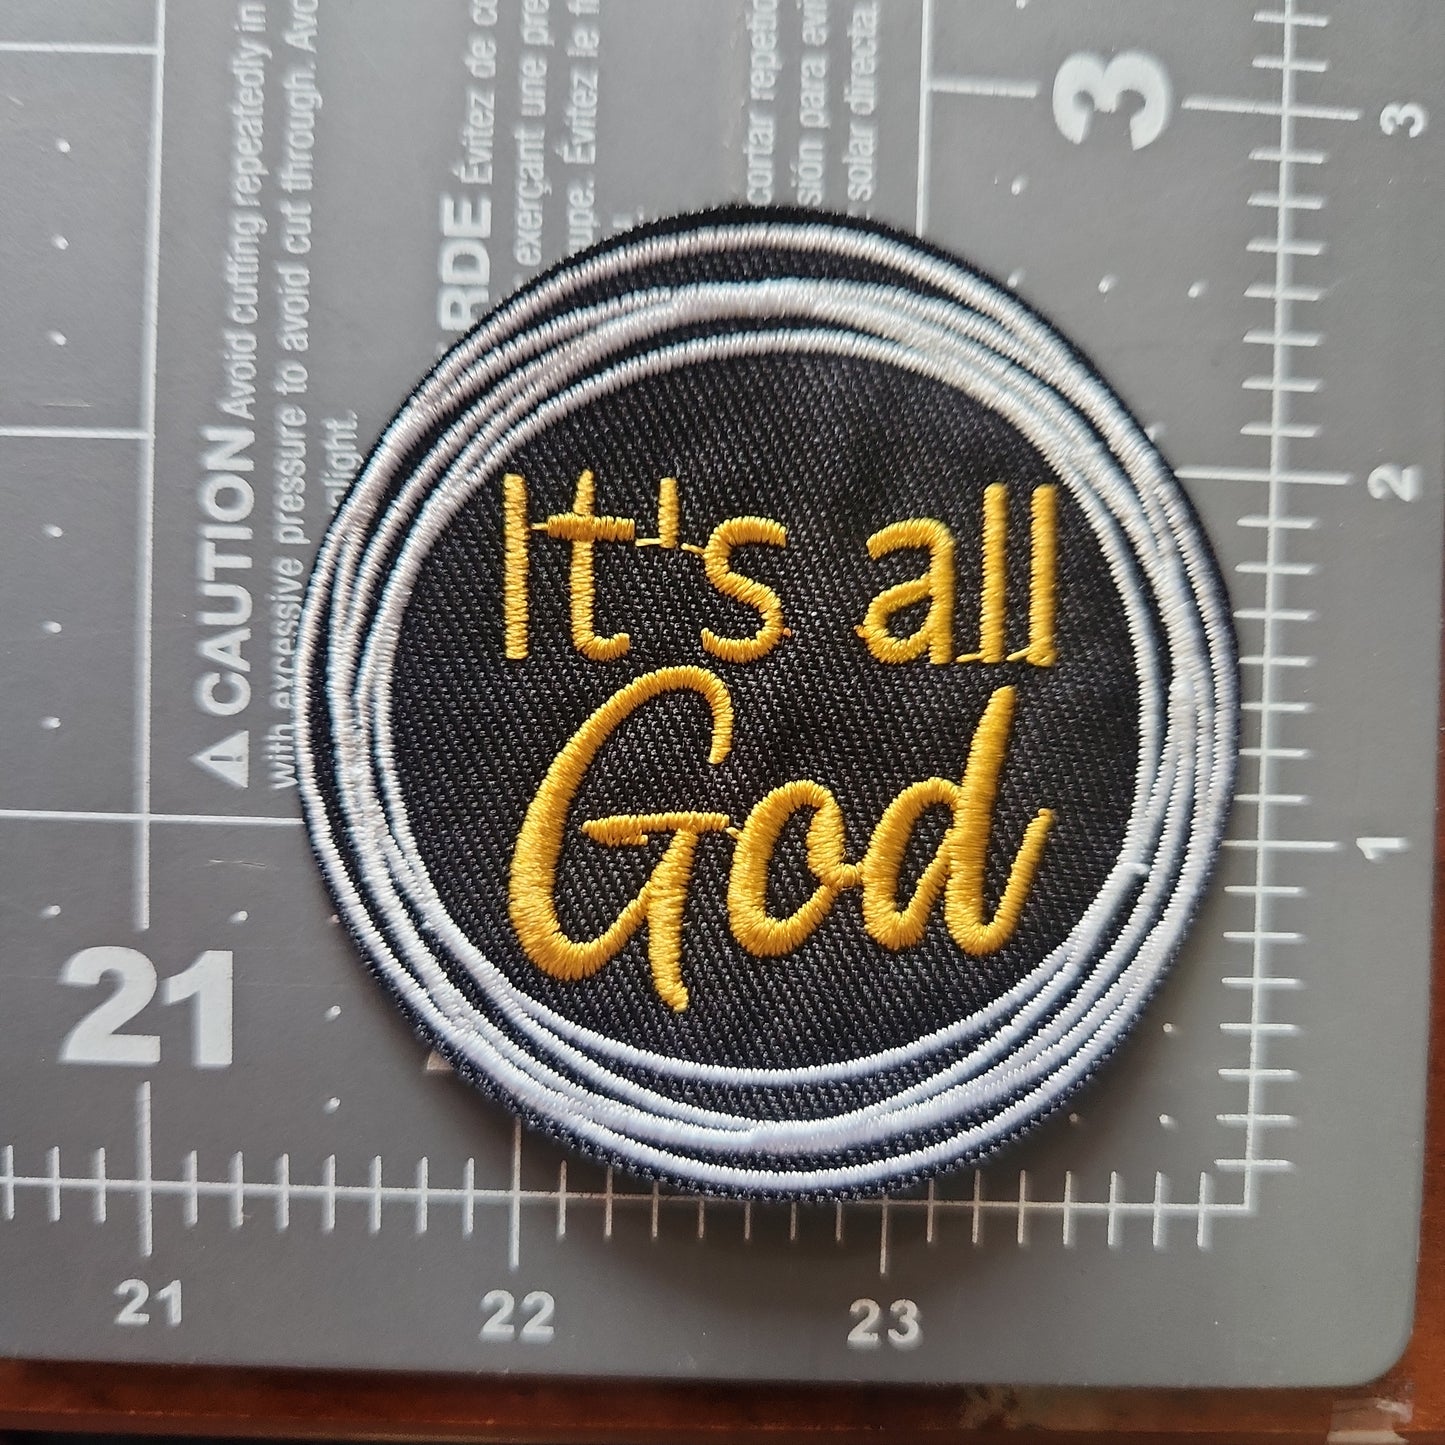 RESTOCK Arriving 5/31 It's All God Iron-On PATCH